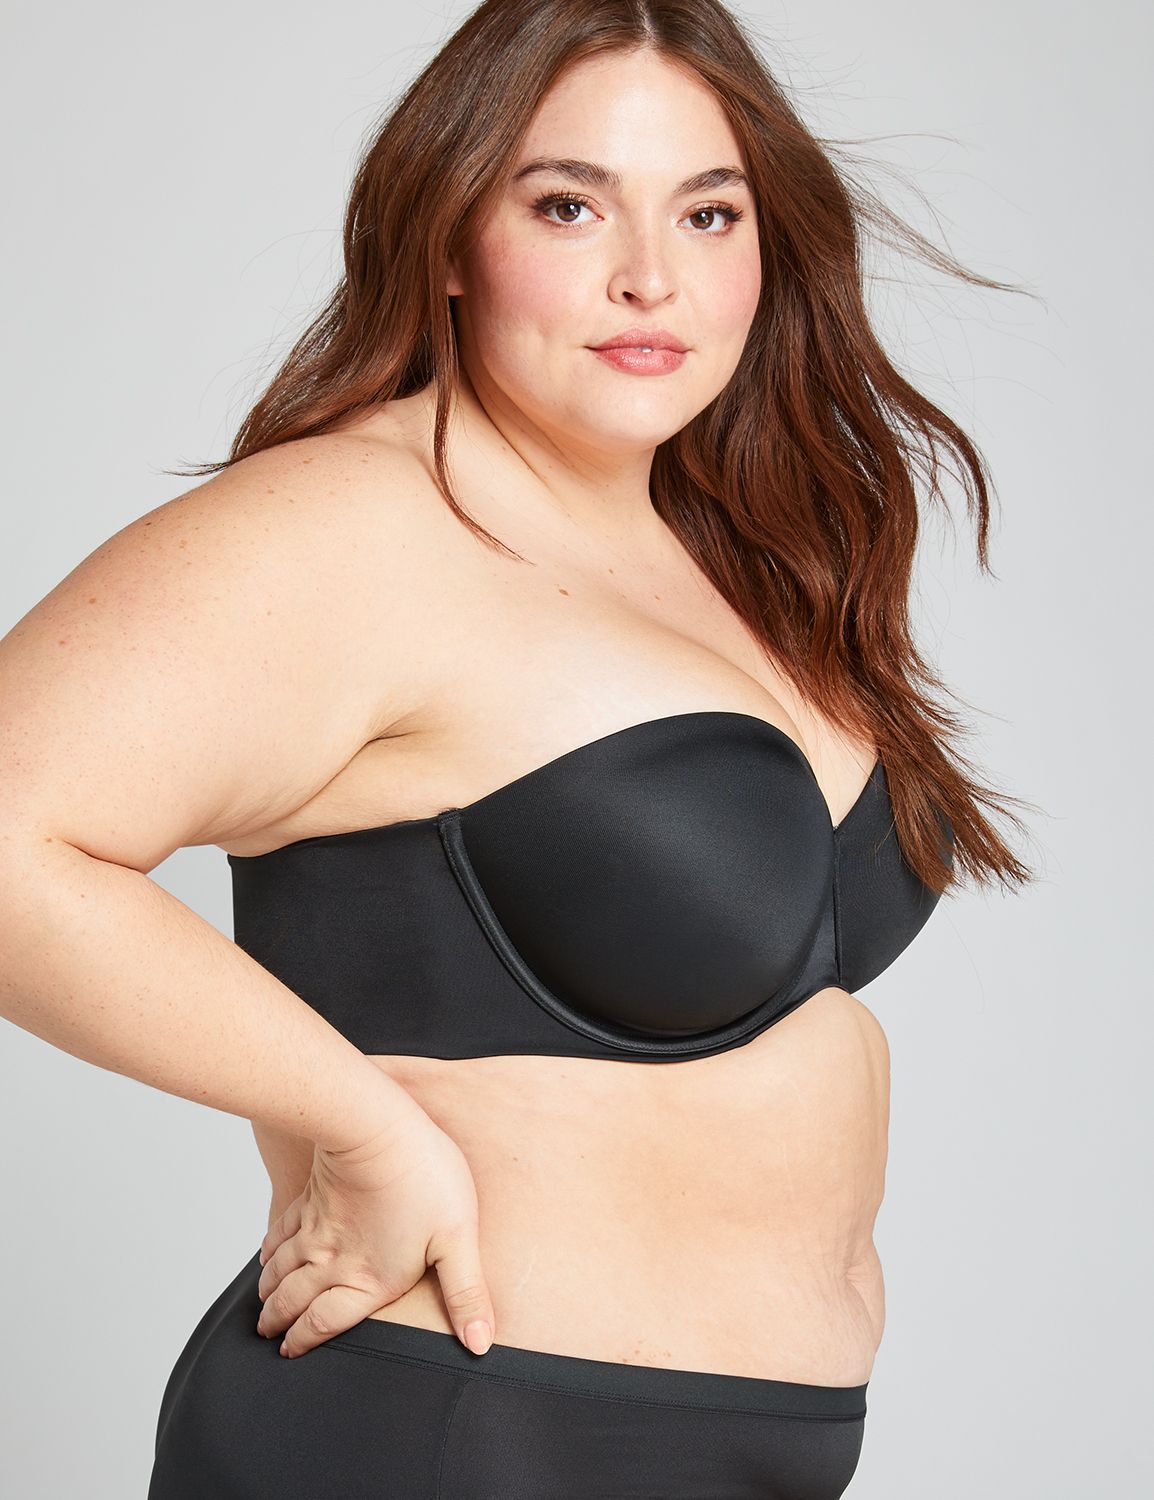 Lane Bryant - THE strapless bra of the summer. Cacique Boost Strapless, now  in 86 sizes! Bands 32-50. Cups A-K. #ForTheLoveOfCurves Shop: http:// lanebryant.us/otpDco